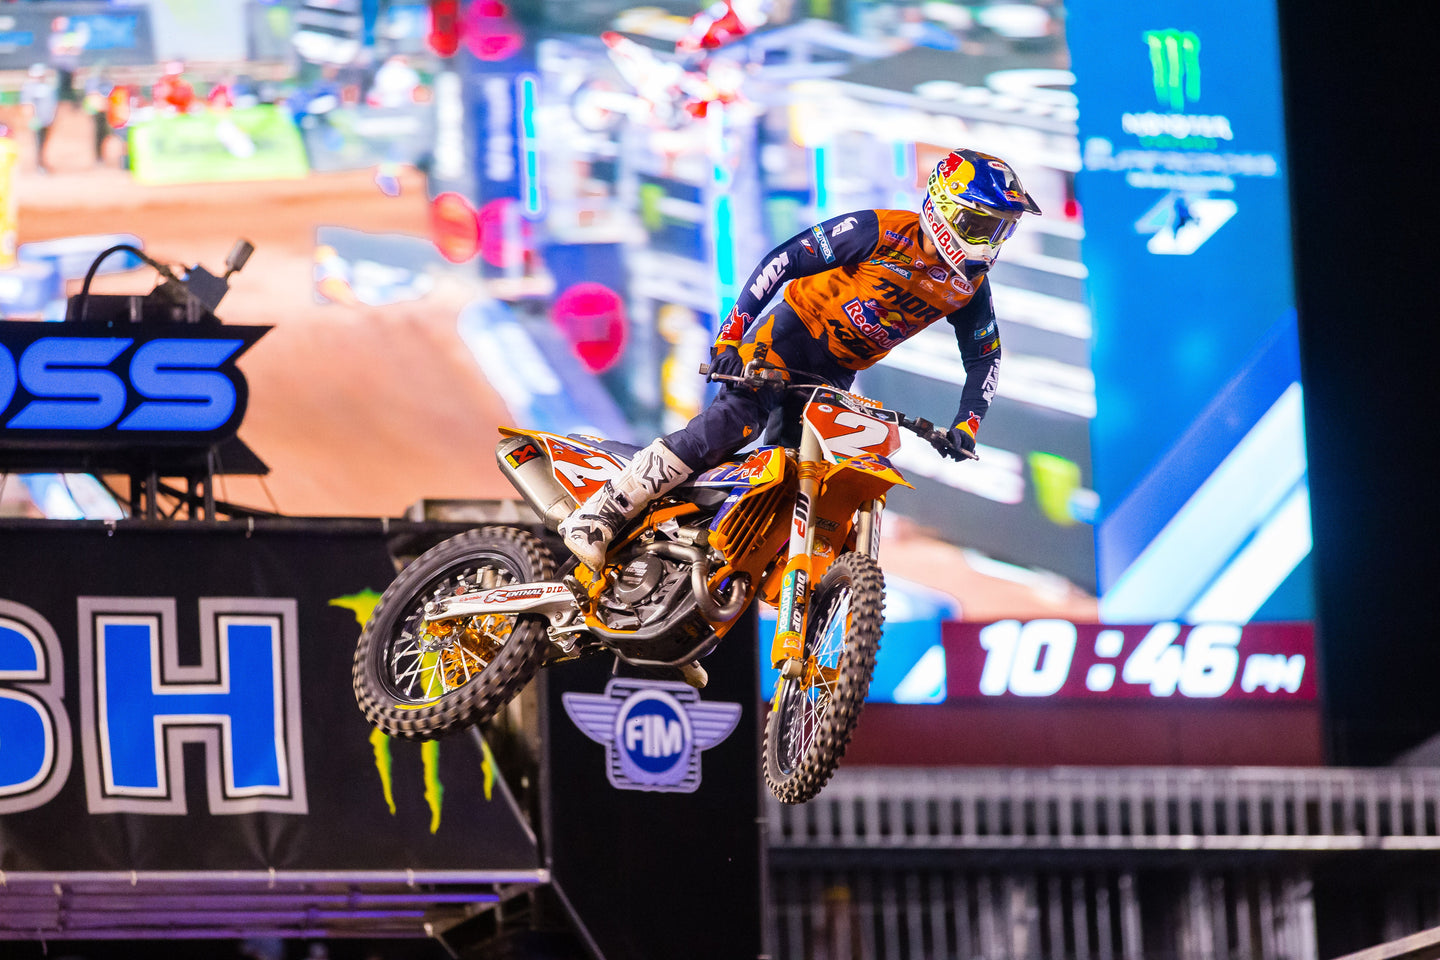 ALPINESTARS PODIUM LOCK-OUT AS COOPER WEBB BLITZES SALT LAKE CITY 2 (EAST/WEST SHOWDOWN) TO TAKE ANOTHER 450SX WIN; MARVIN MUSQUIN SECOND, CHASE SEXTON THIRD